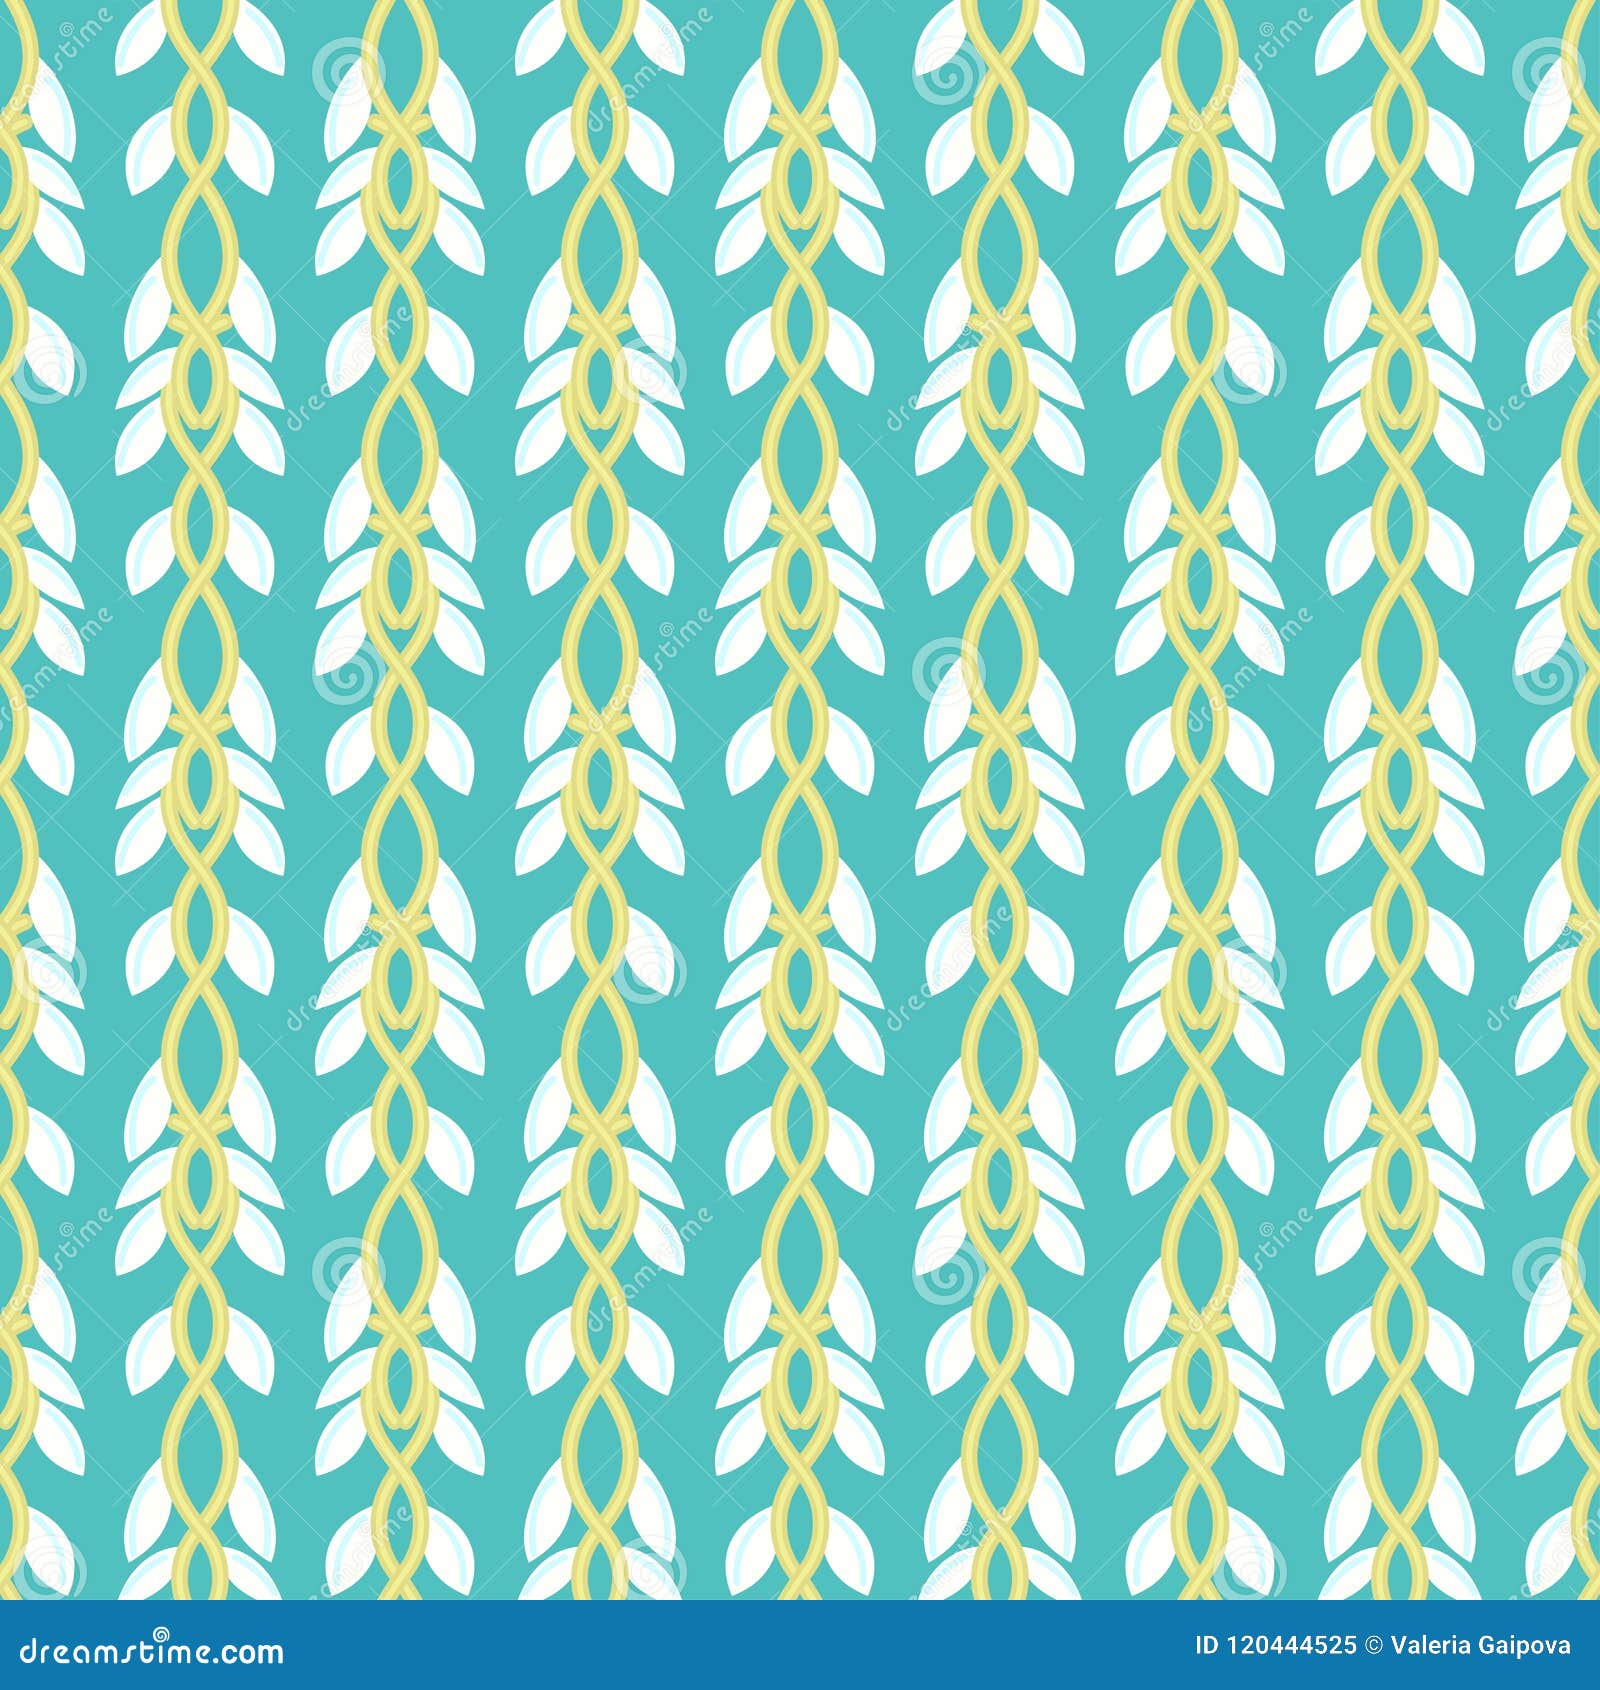 Floral Seamless Pattern. Hand Drawn Interwoven Branches. Repeating